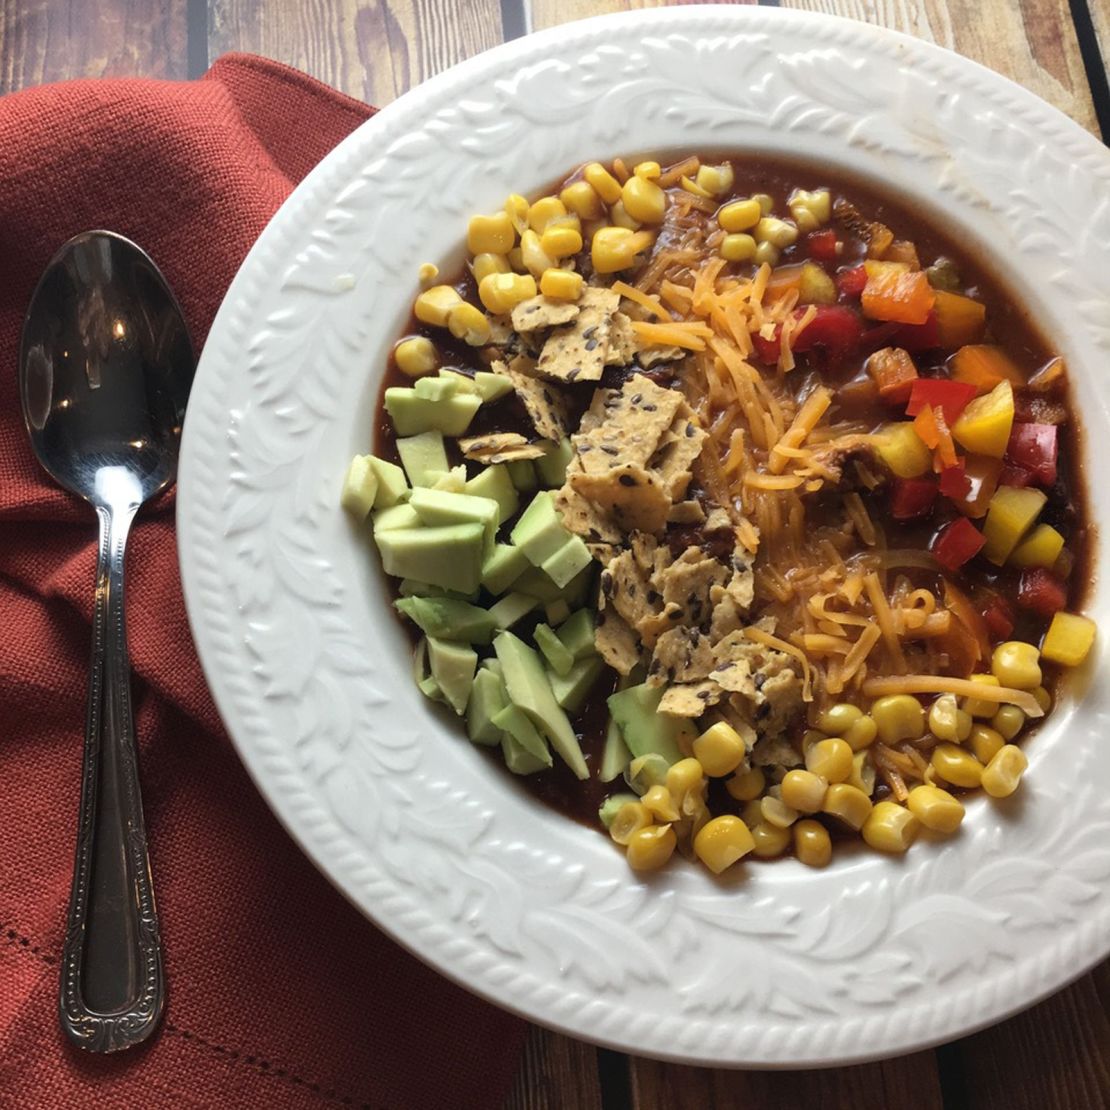 Keep your pantry stocked with canned beans, which you can use to make registered dietitian Bonnie Taub-Dix's spicy dark chocolate chili bowls.